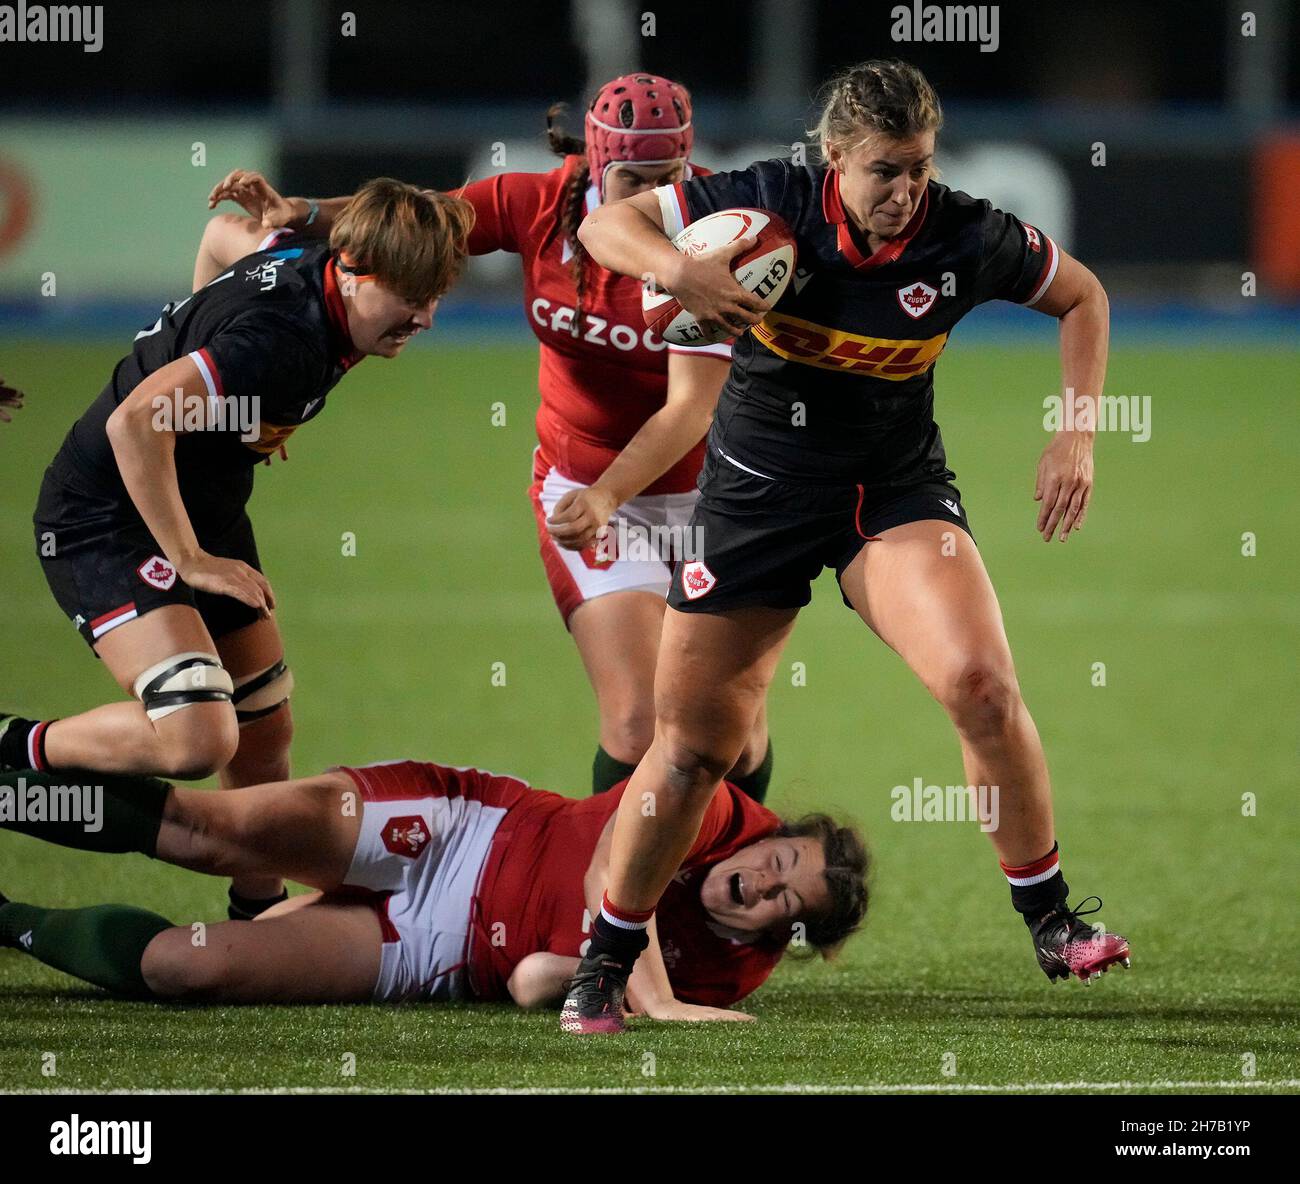 Cardiff, pays de Galles, 21, novembre 2021,Brittany Kassil (Canada) en action, sous Wales Women c. Canada Women's Rugby, Credit:, Graham Glendinning,/ Alamy Live News Banque D'Images